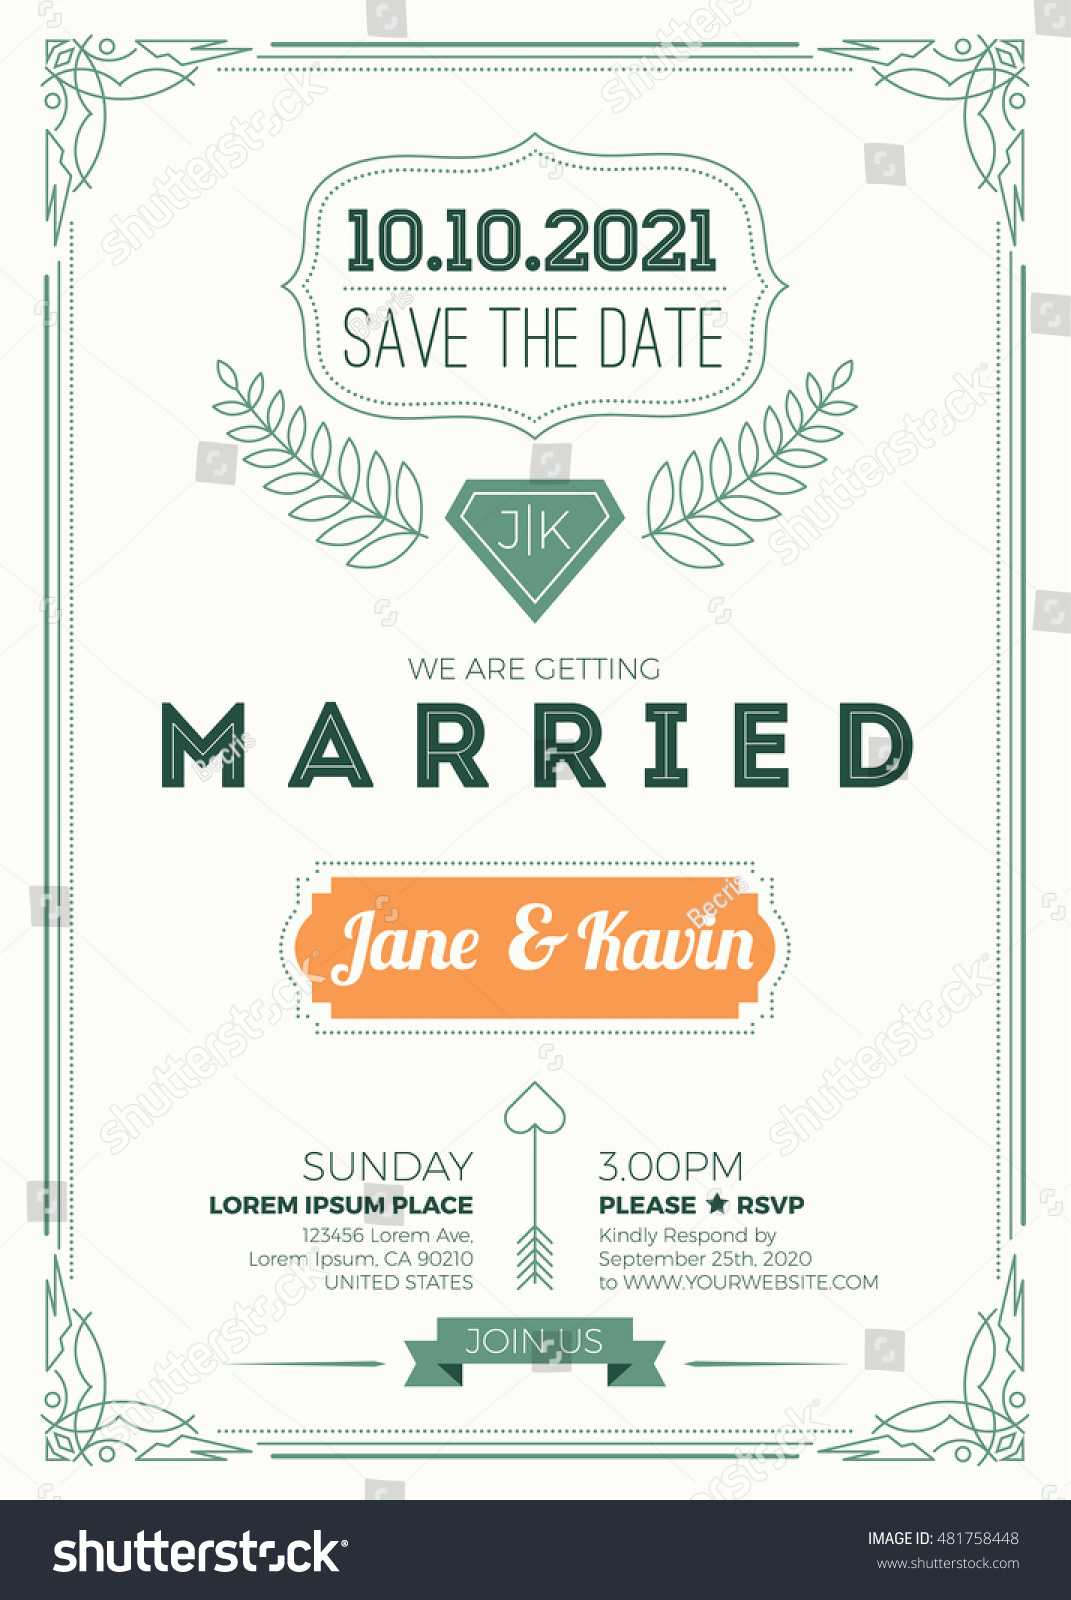 Vintage Wedding Invitation Card A5 Size Stock Image Inside Wedding Card Size Template